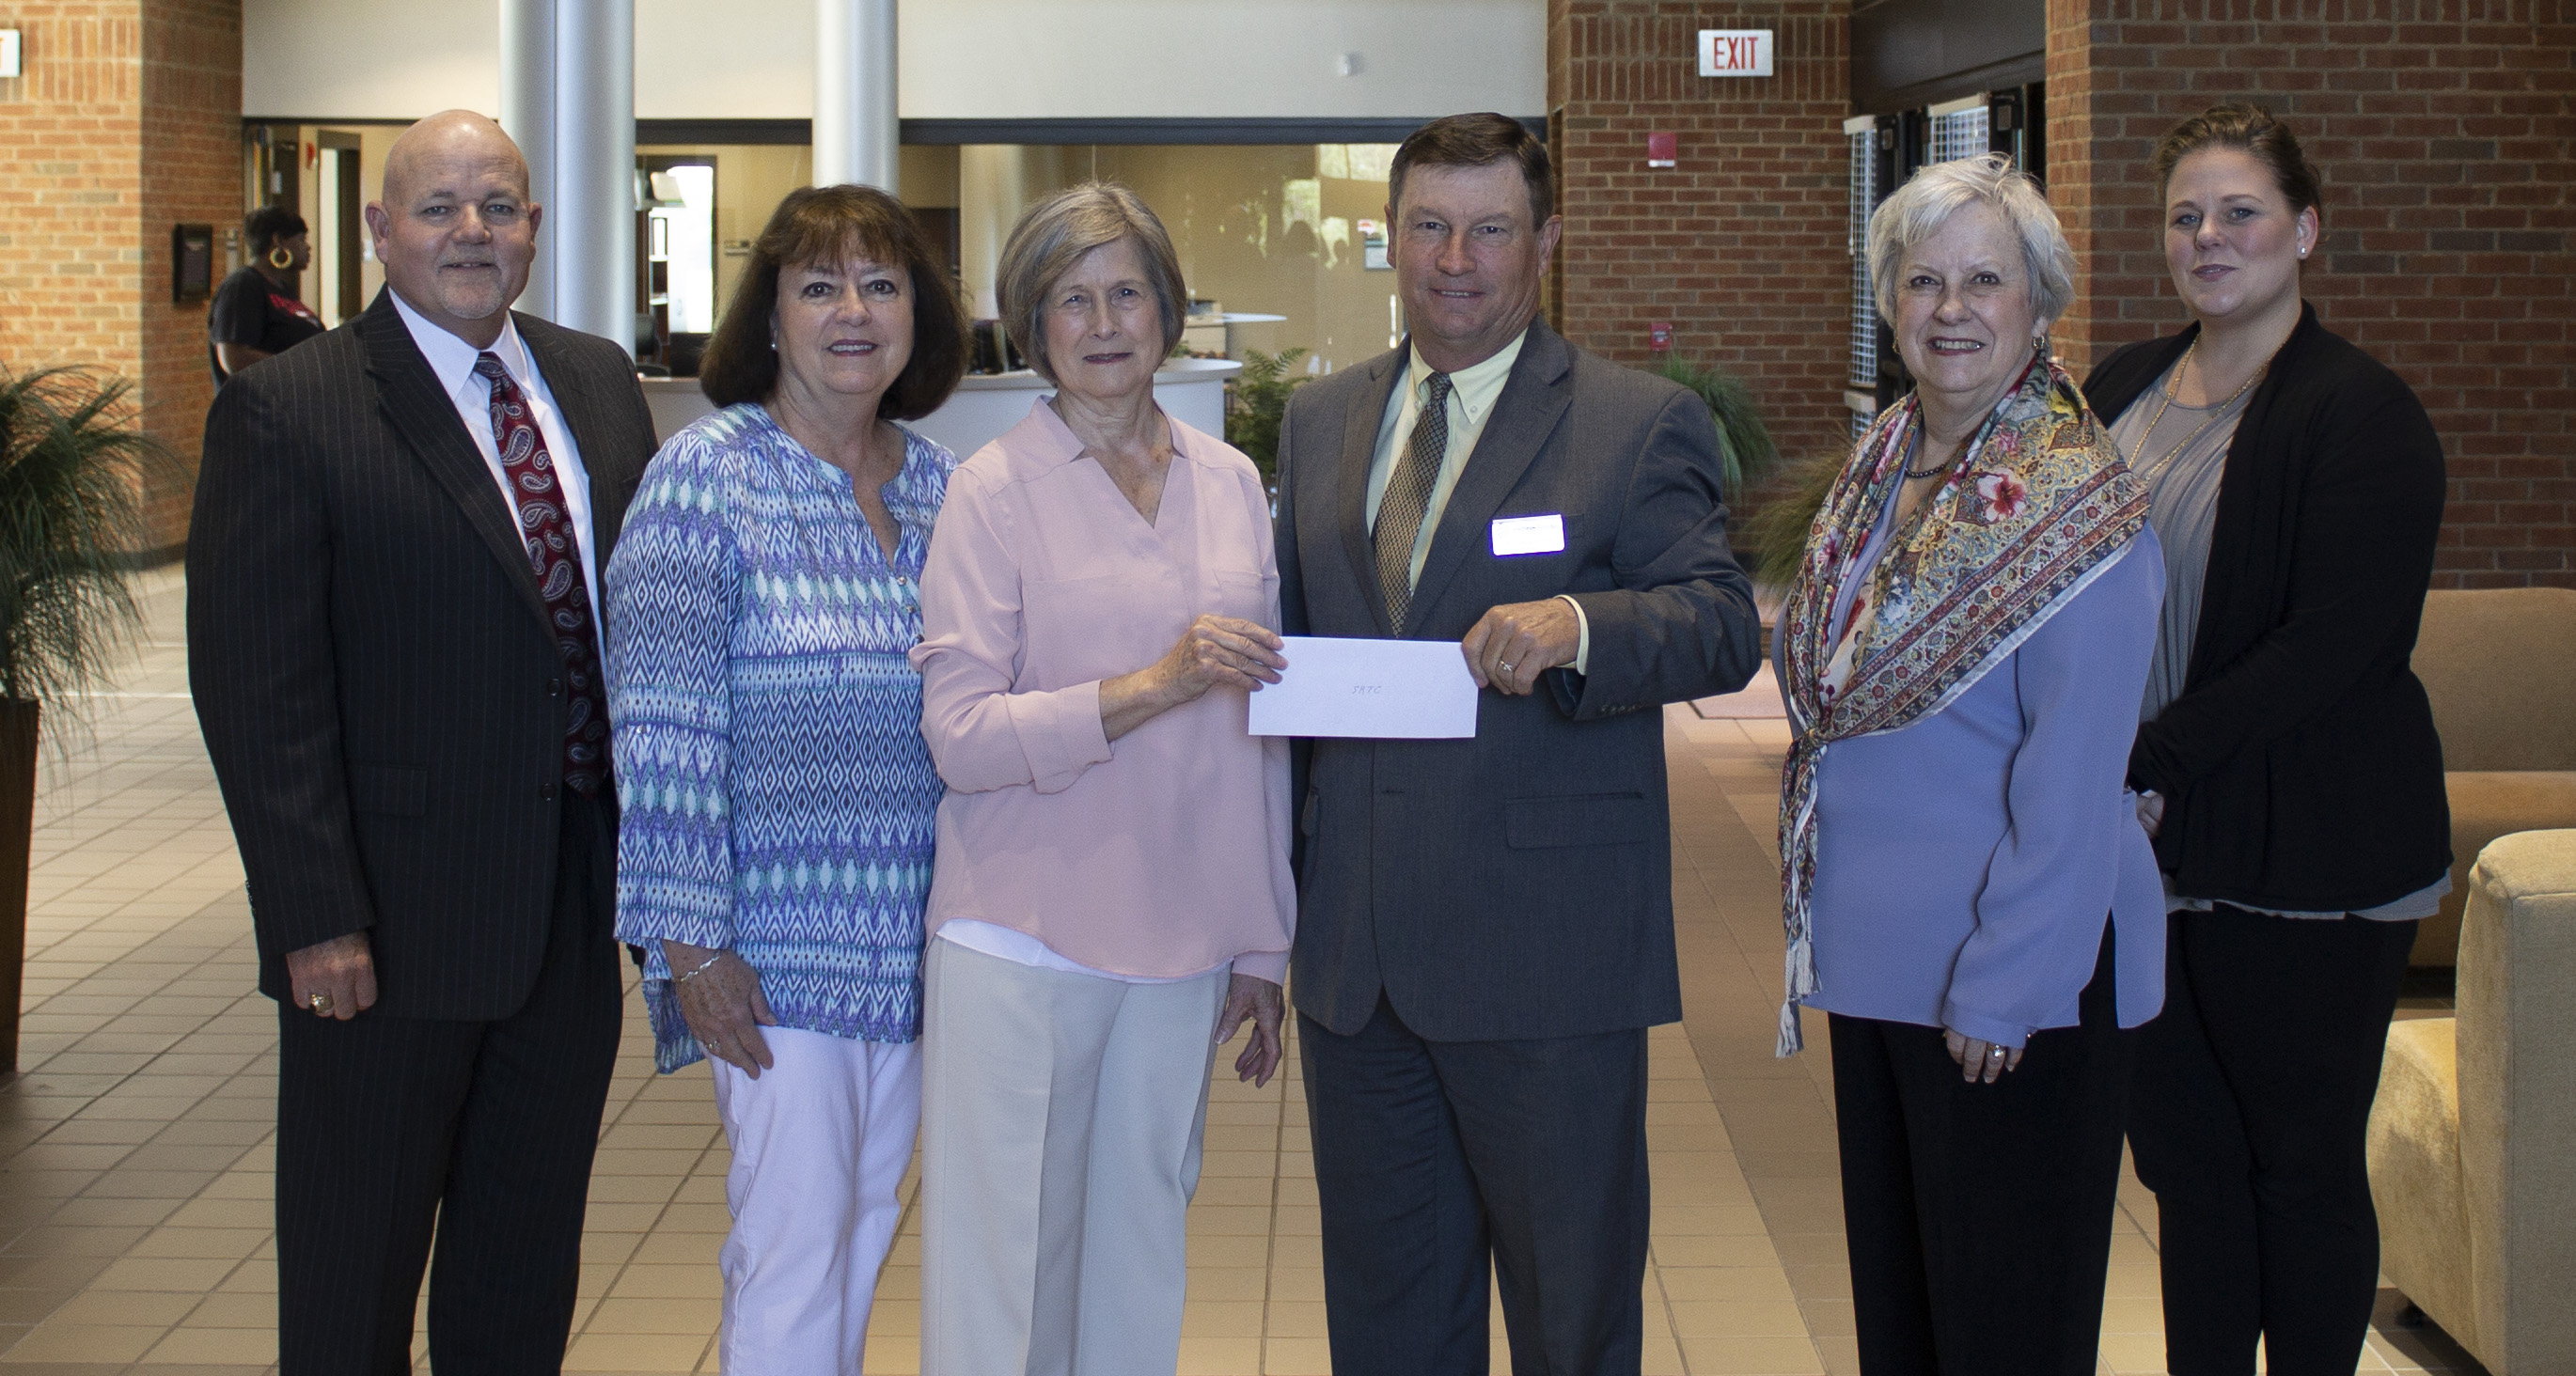 group photo of check presentation Left to Right: Jim Glass, Provost/Vice-President for Academic Affairs; Elizabeth Herndon, Moultrie Federated Guild President; Mary Vines, Antique Show Coordinator; Dr. Craig Wentworth, SRTC President; Lesa Moser, Antique Show Dealer Coordinator; Amy Maison, Vice-President for Institutional Advancement, Marketing, and Public Relations.